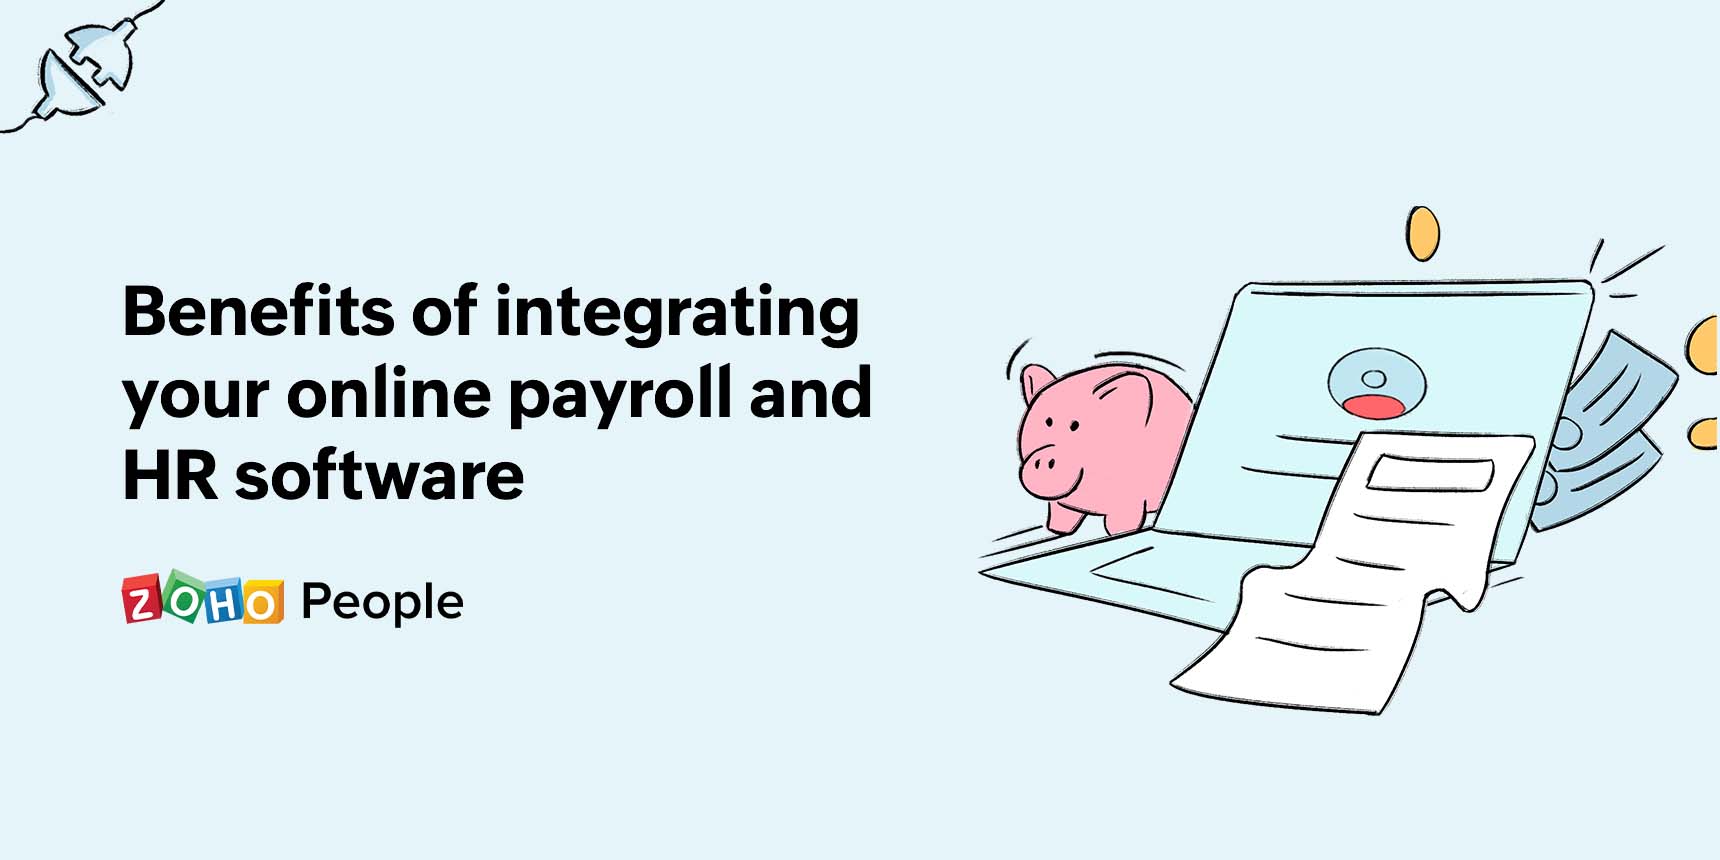 Benefits of integrating online payroll system with HR software